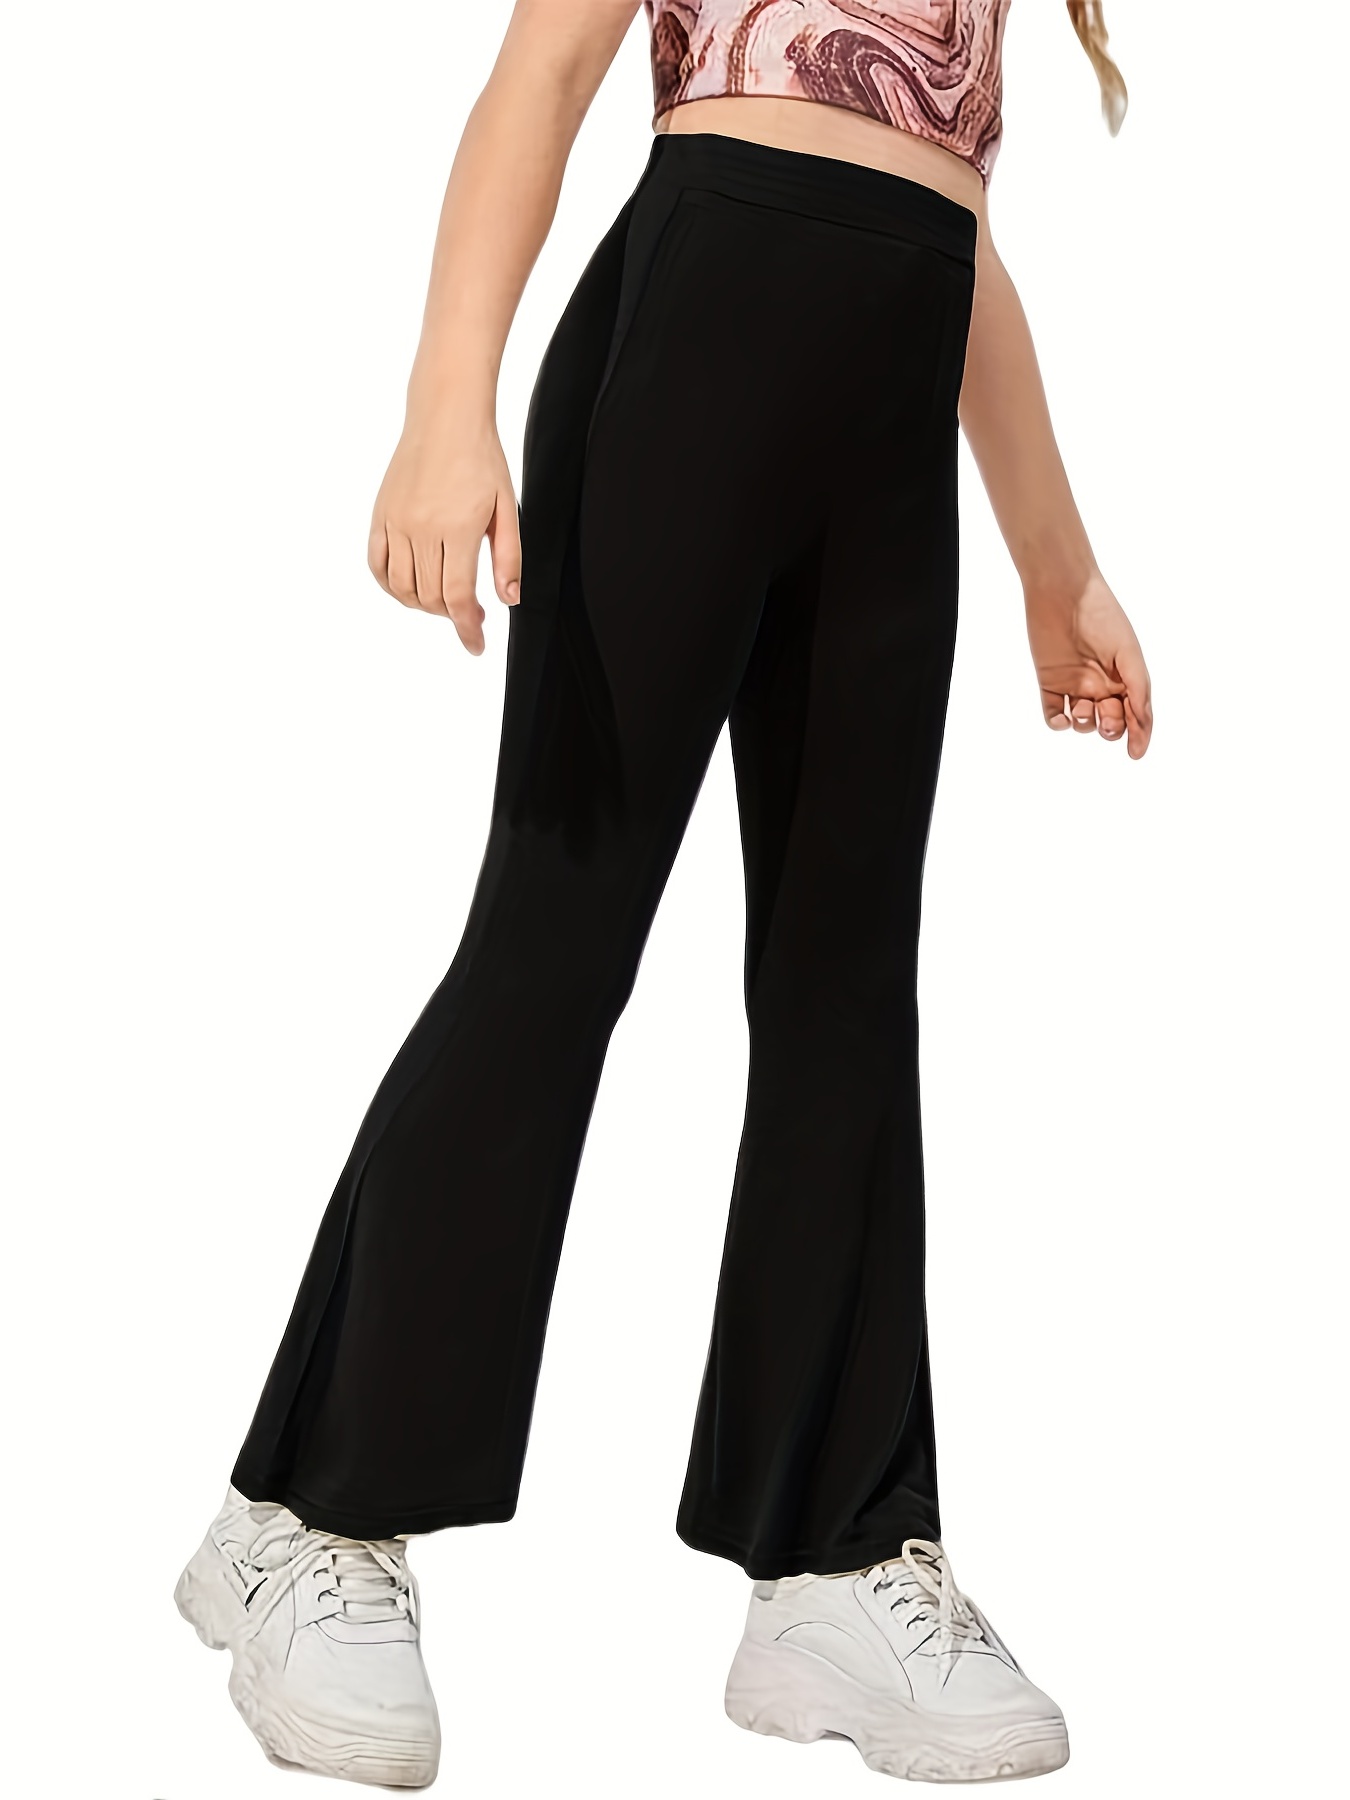 Women's High Waisted Flare Pants Comfy Stretchy Bell Bottom Wide Leg Pants  Skinny Lounge Trousers with Pockets 